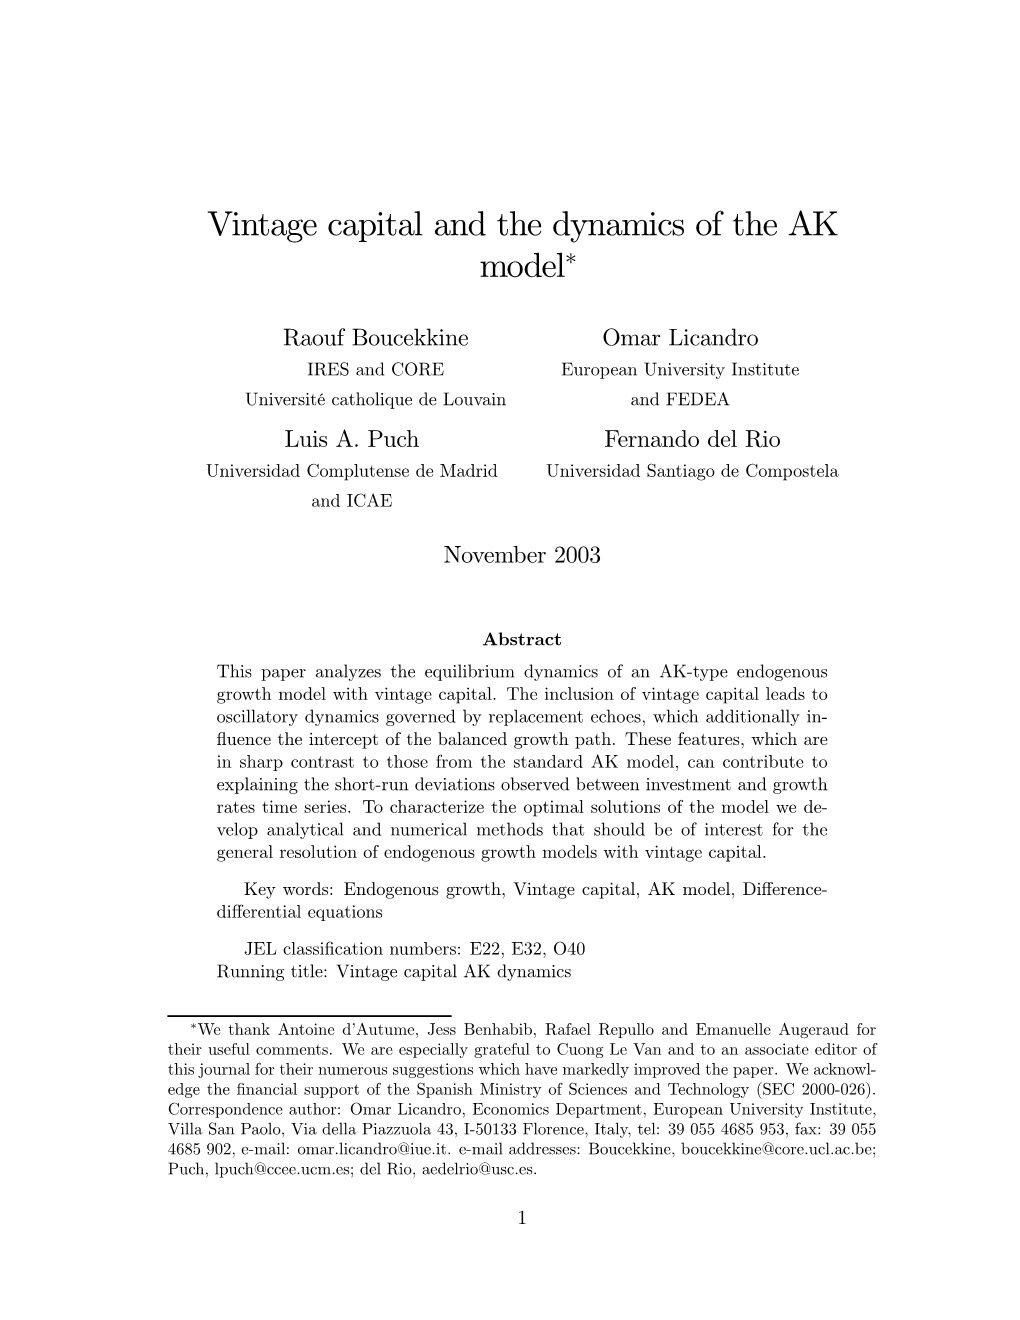 Vintage Capital and the Dynamics of the AK Model∗